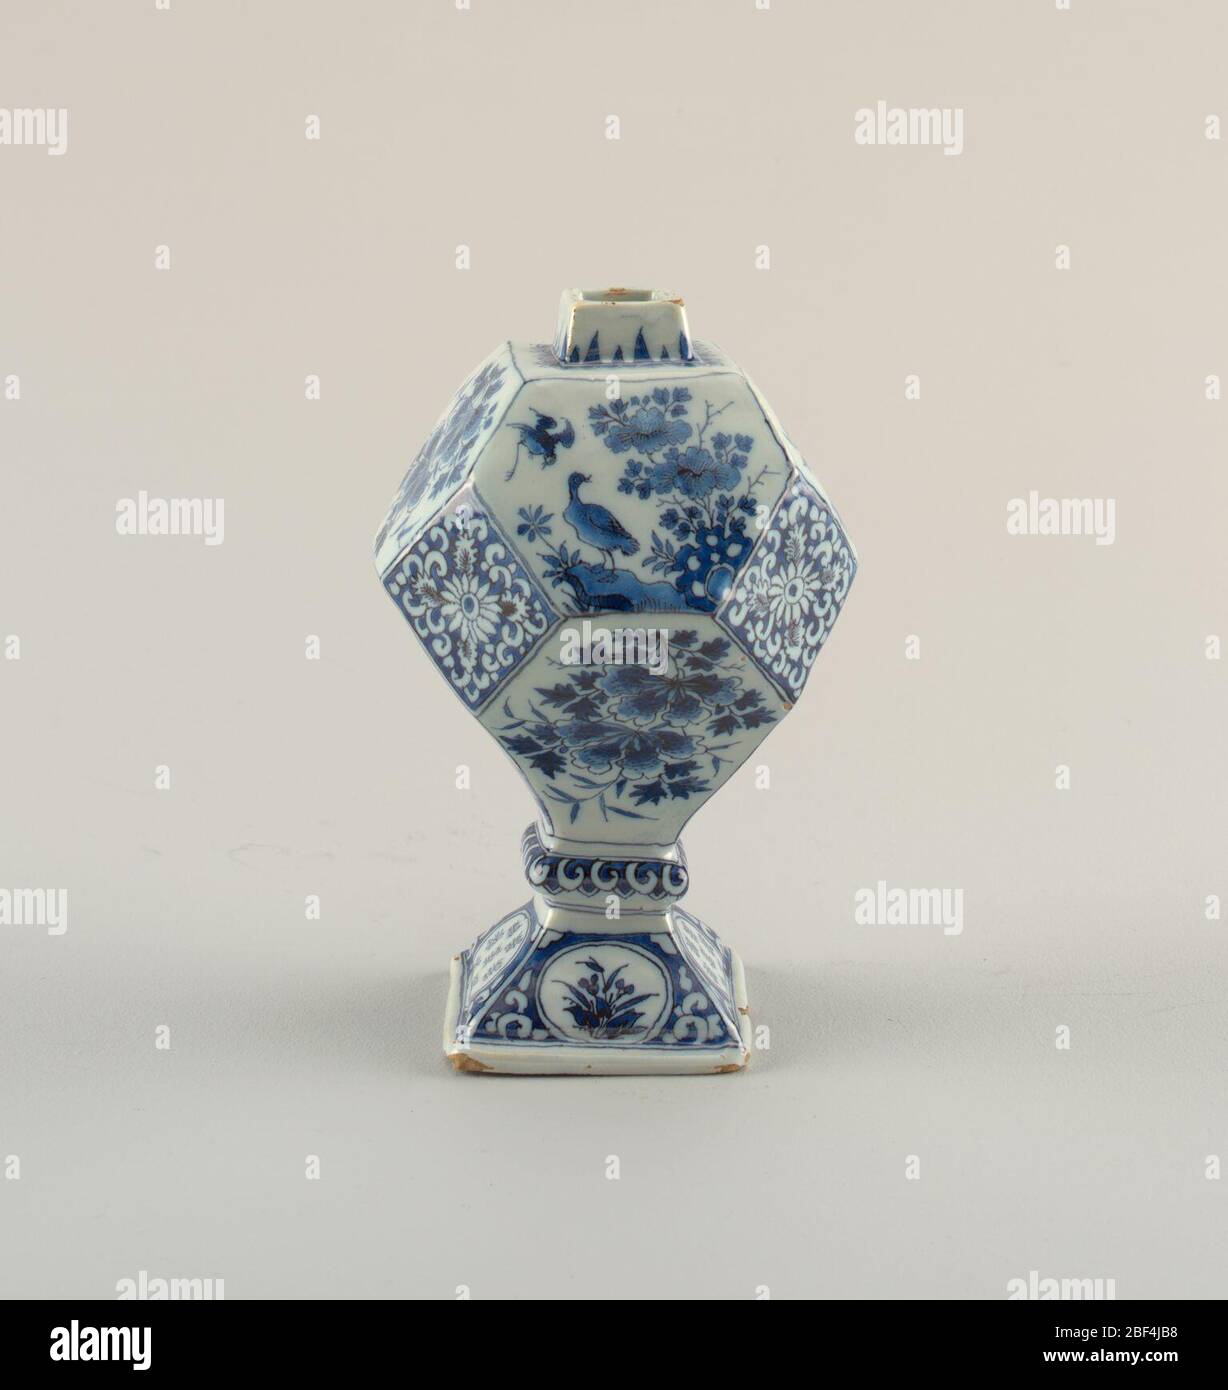 Bottle. Twelve-faceted body with short square-sided neck on a 4-sided domed foot with knop; painted in underglaze blue on white with chinoiserie designs of flowers and birds, leaves, pseudo-Chinese characters in reserve on base. Stock Photo